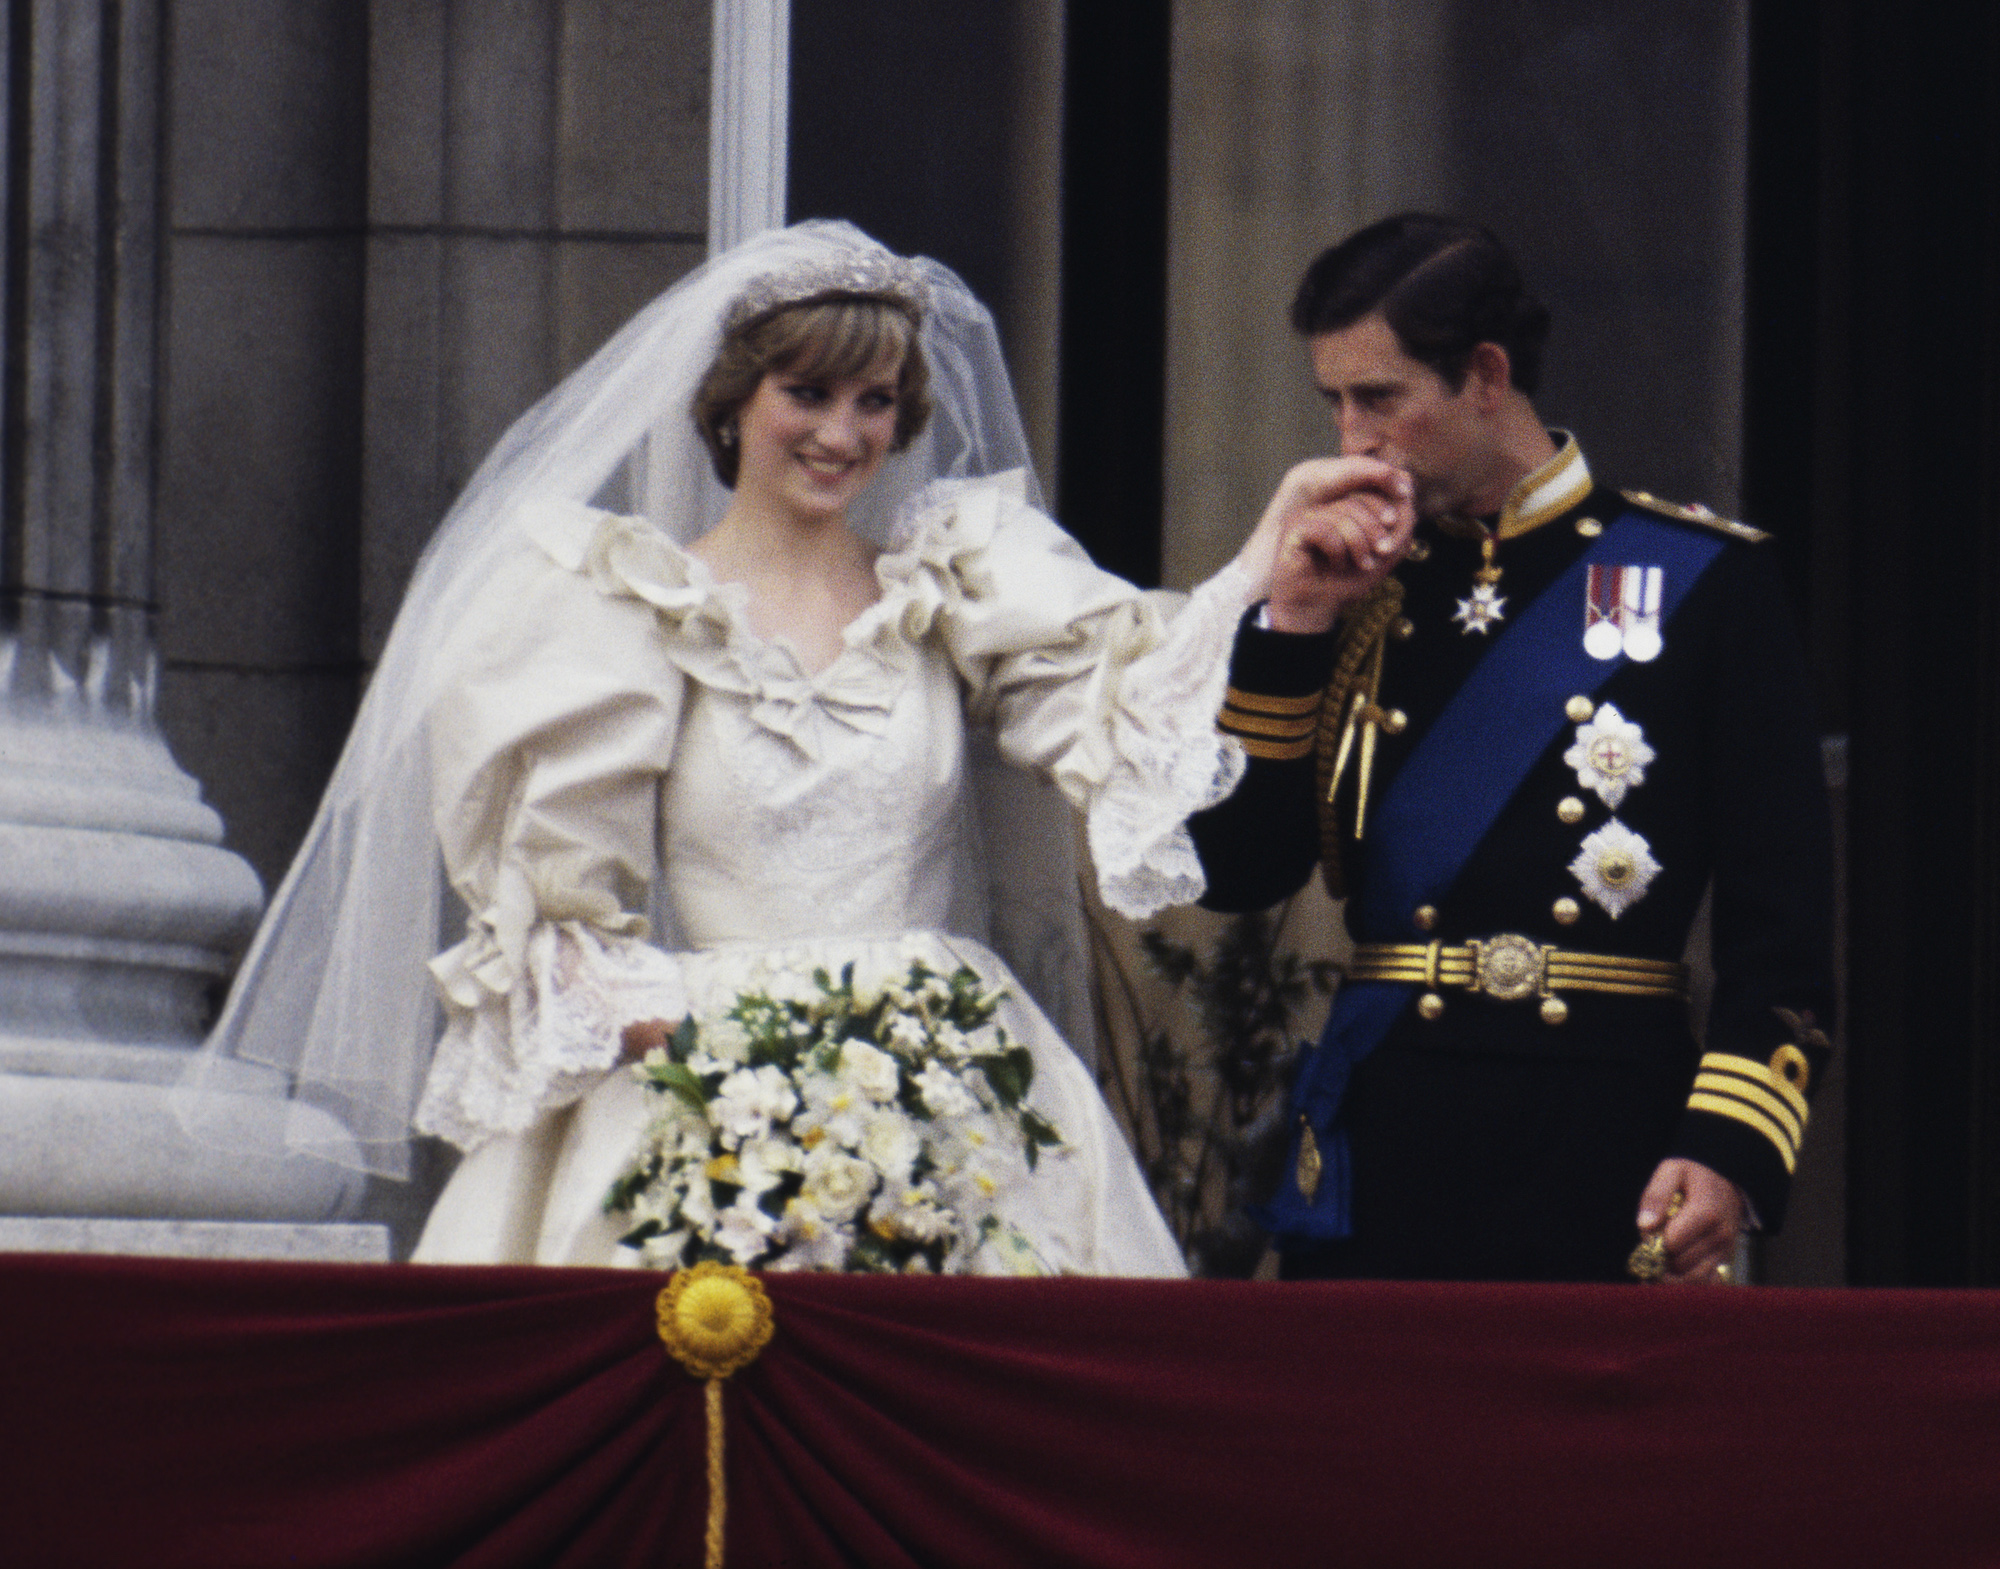 After Princes Diana’s wedding ceremony, Prince Charles gently kisses Diana’s hand as they greet the crowd from their balcony.